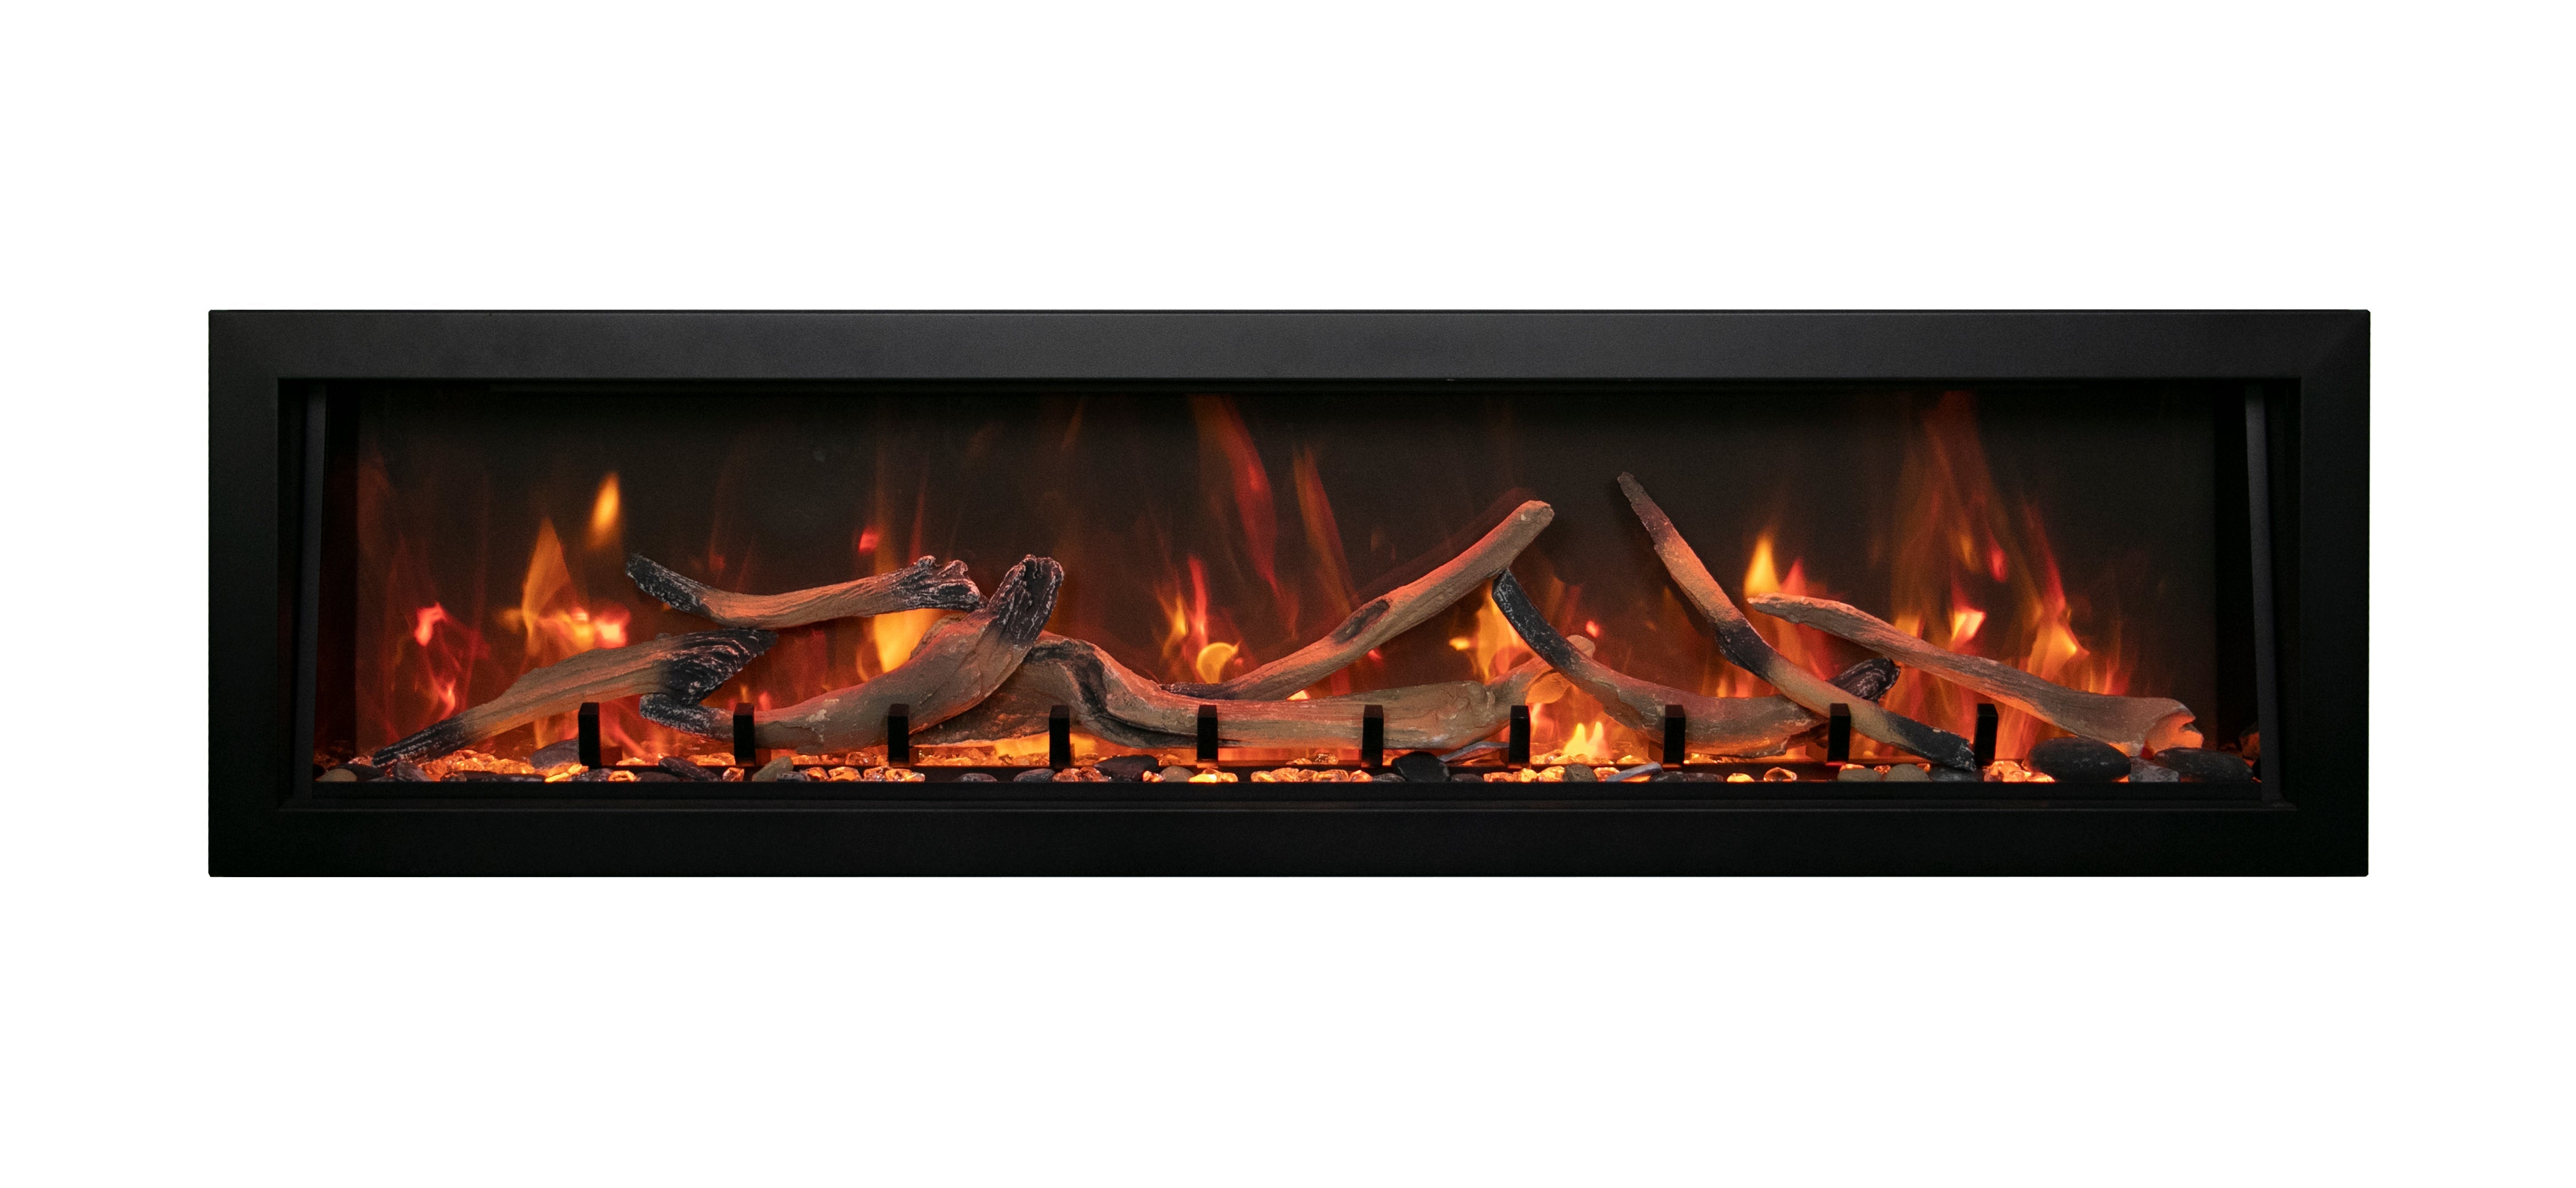 Amantii 40" Panorama Deep Indoor or Outdoor Electric Fireplace -BI-40-DEEP-OD- Front View With Logs With Yellow Orange Flame